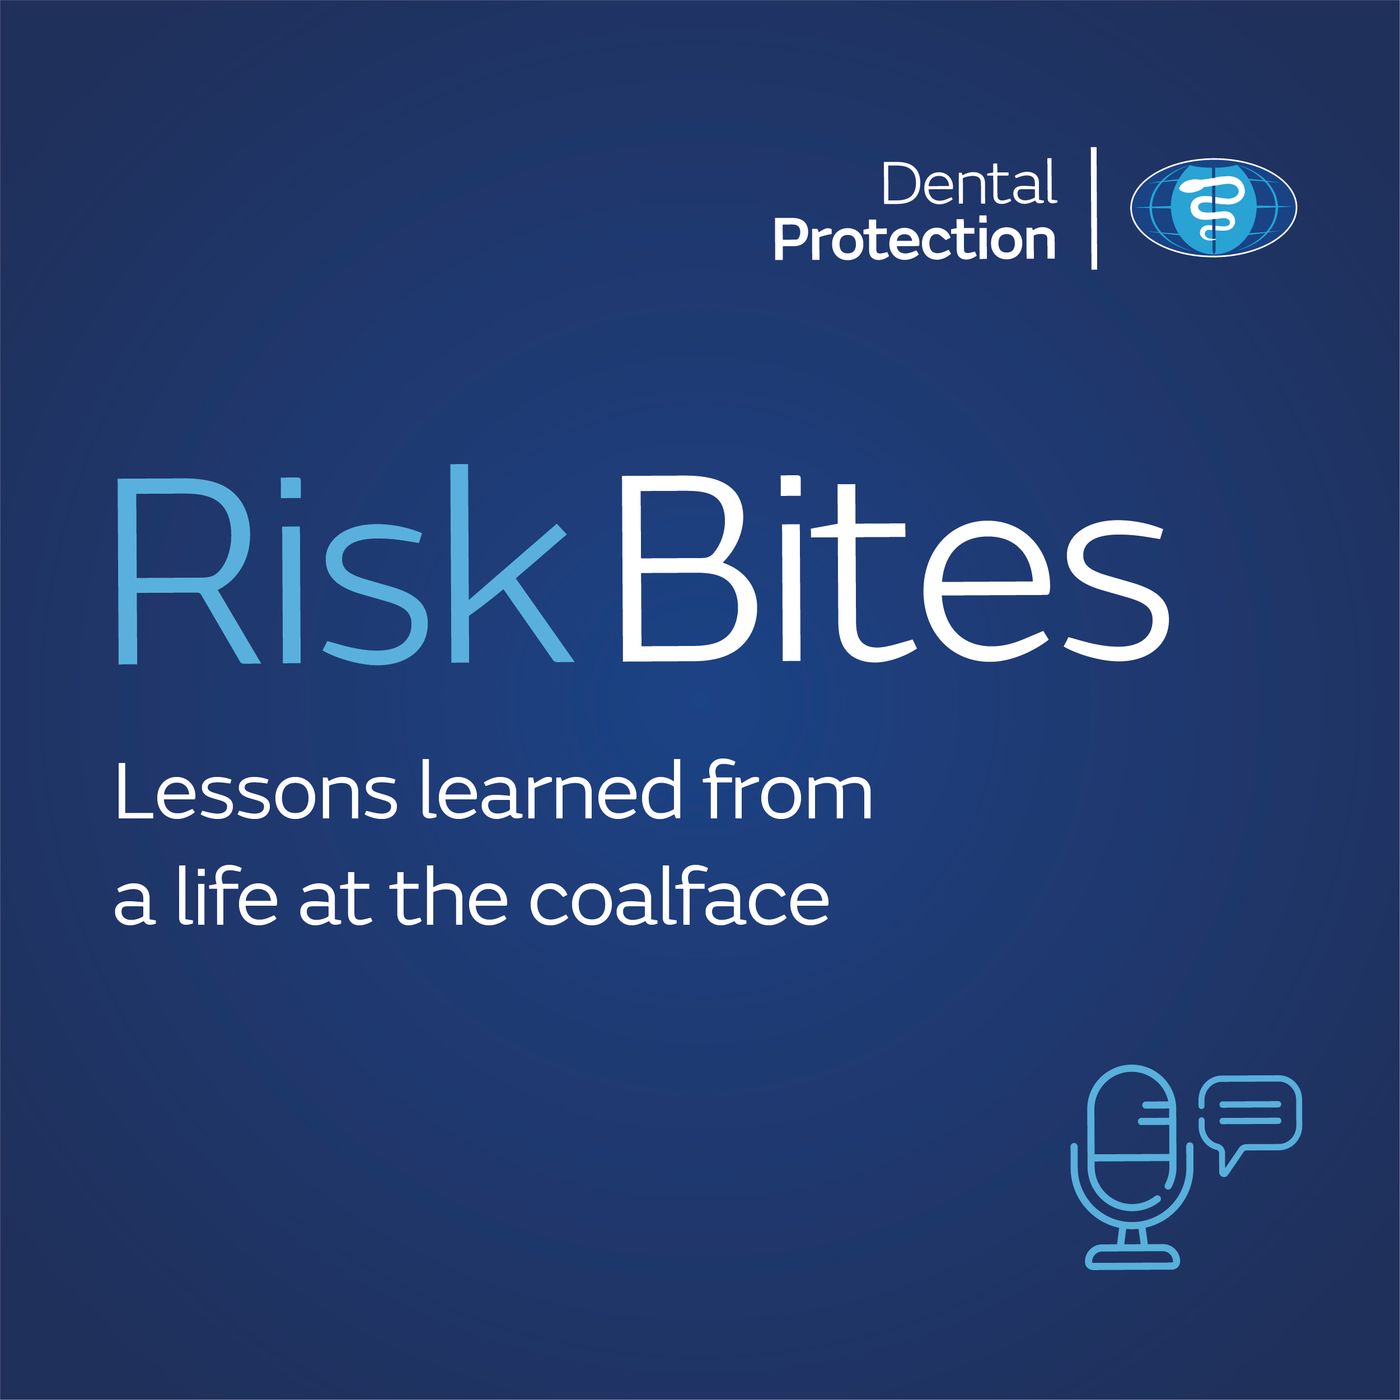 RiskBites: Lessons learned from a life at the coalface